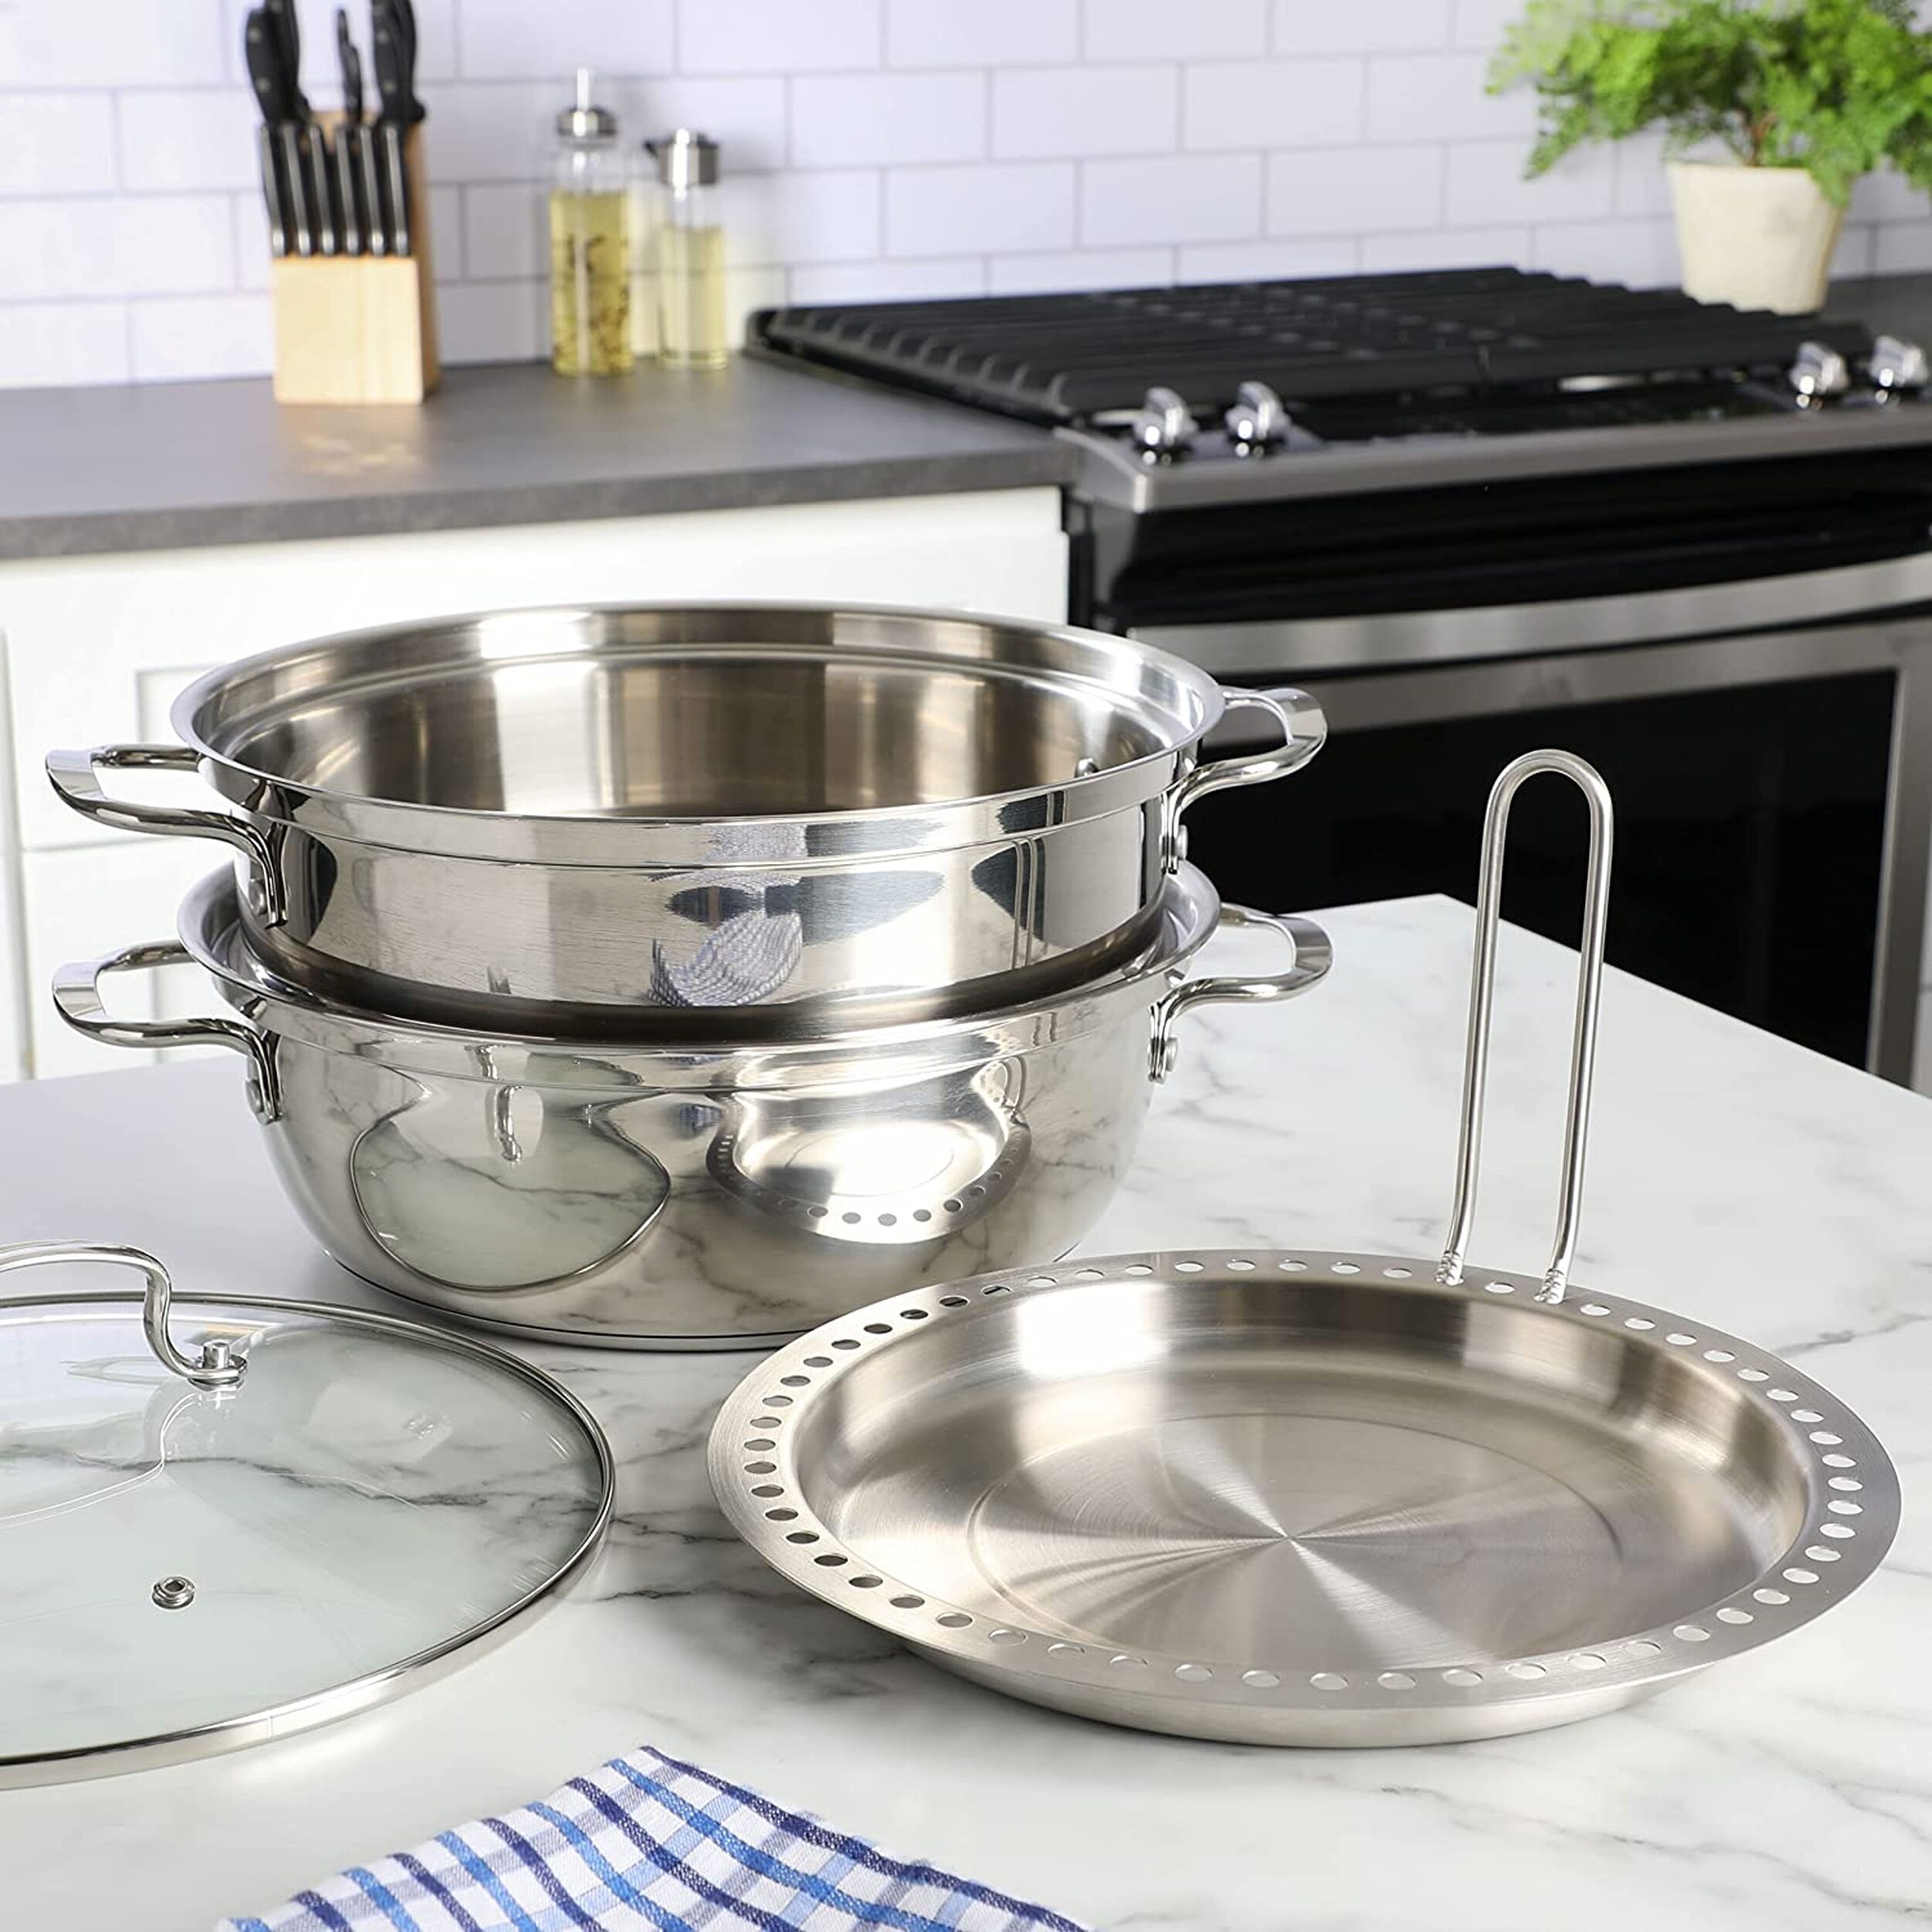 https://ak1.ostkcdn.com/images/products/is/images/direct/21791ec07023dd6dd14a29bff232bfcc26e72161/Kenmore-Elite-Devon-5-Piece-Stainless-Steel-Multi-Steamer-Set.jpg